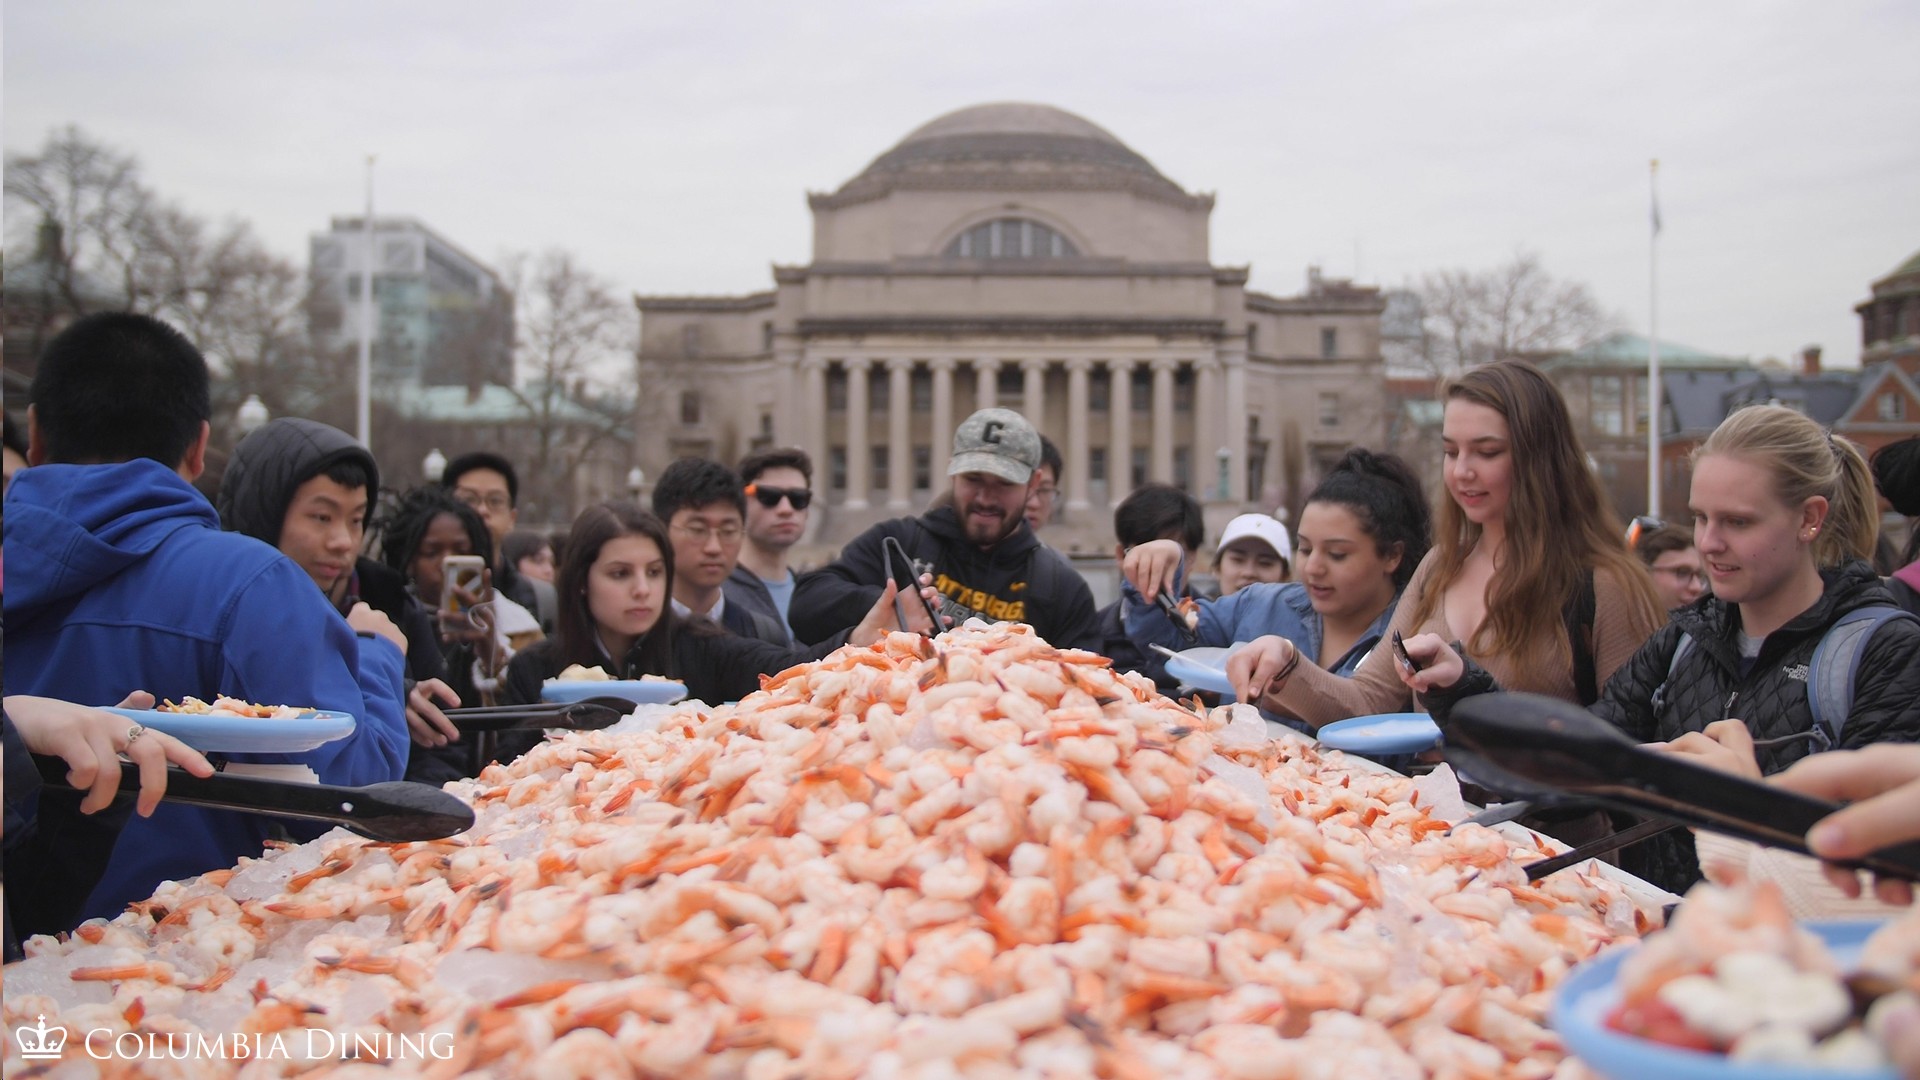 Students serve themselves shrimp from a boat filled with the crustaceans on the lawn in front of Low Library during the annual Surf, Turf and Earth event in 2019.